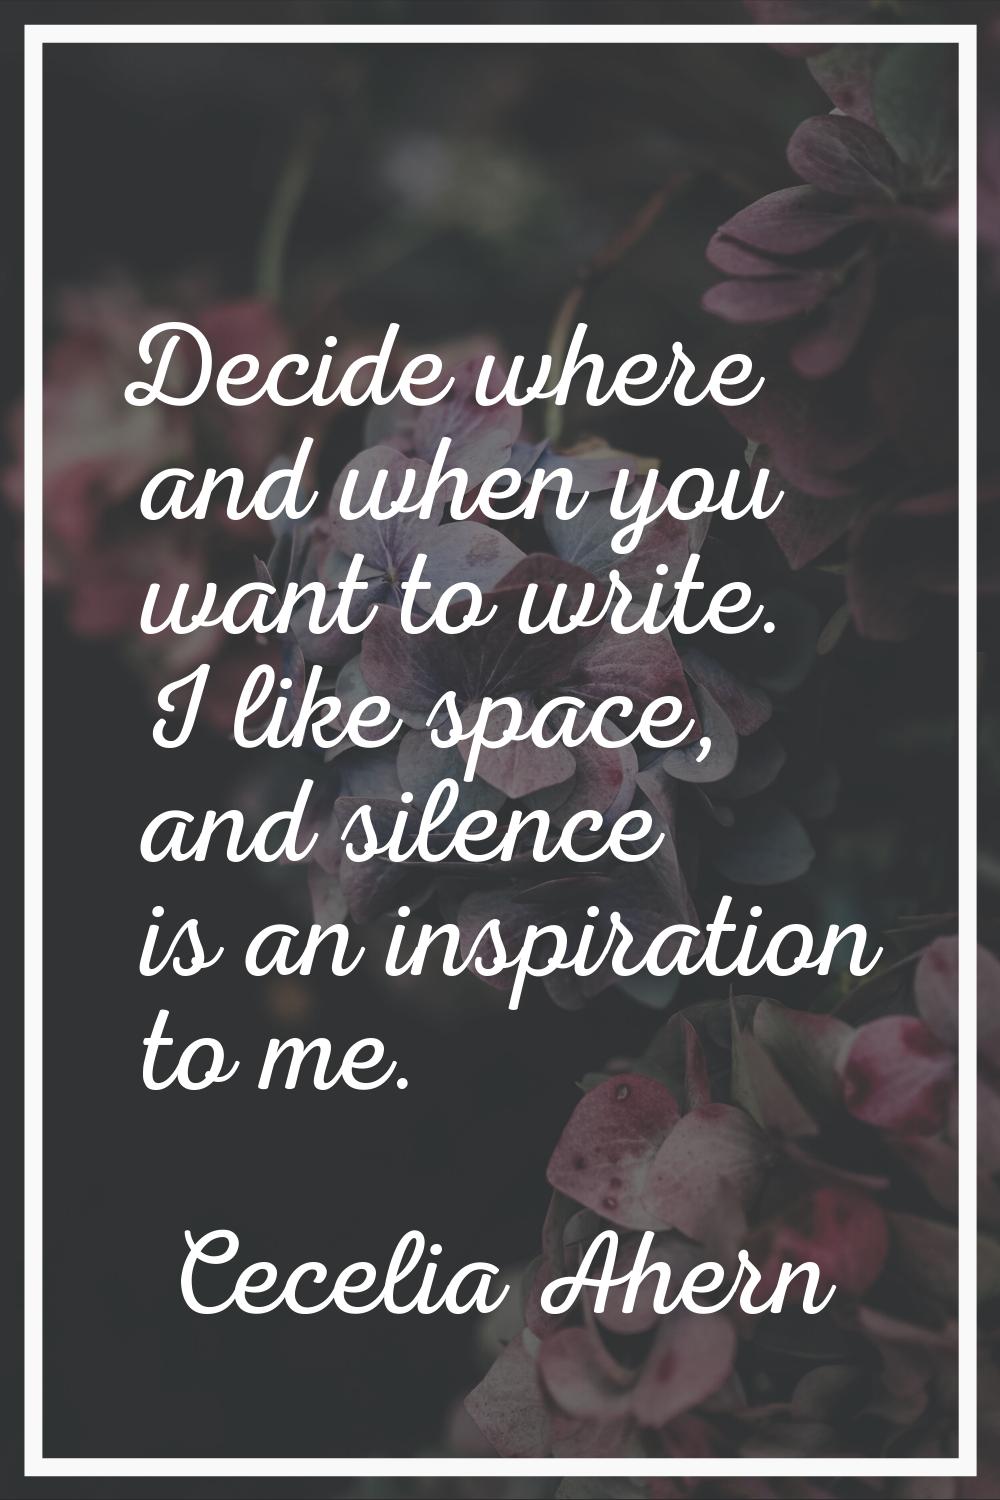 Decide where and when you want to write. I like space, and silence is an inspiration to me.